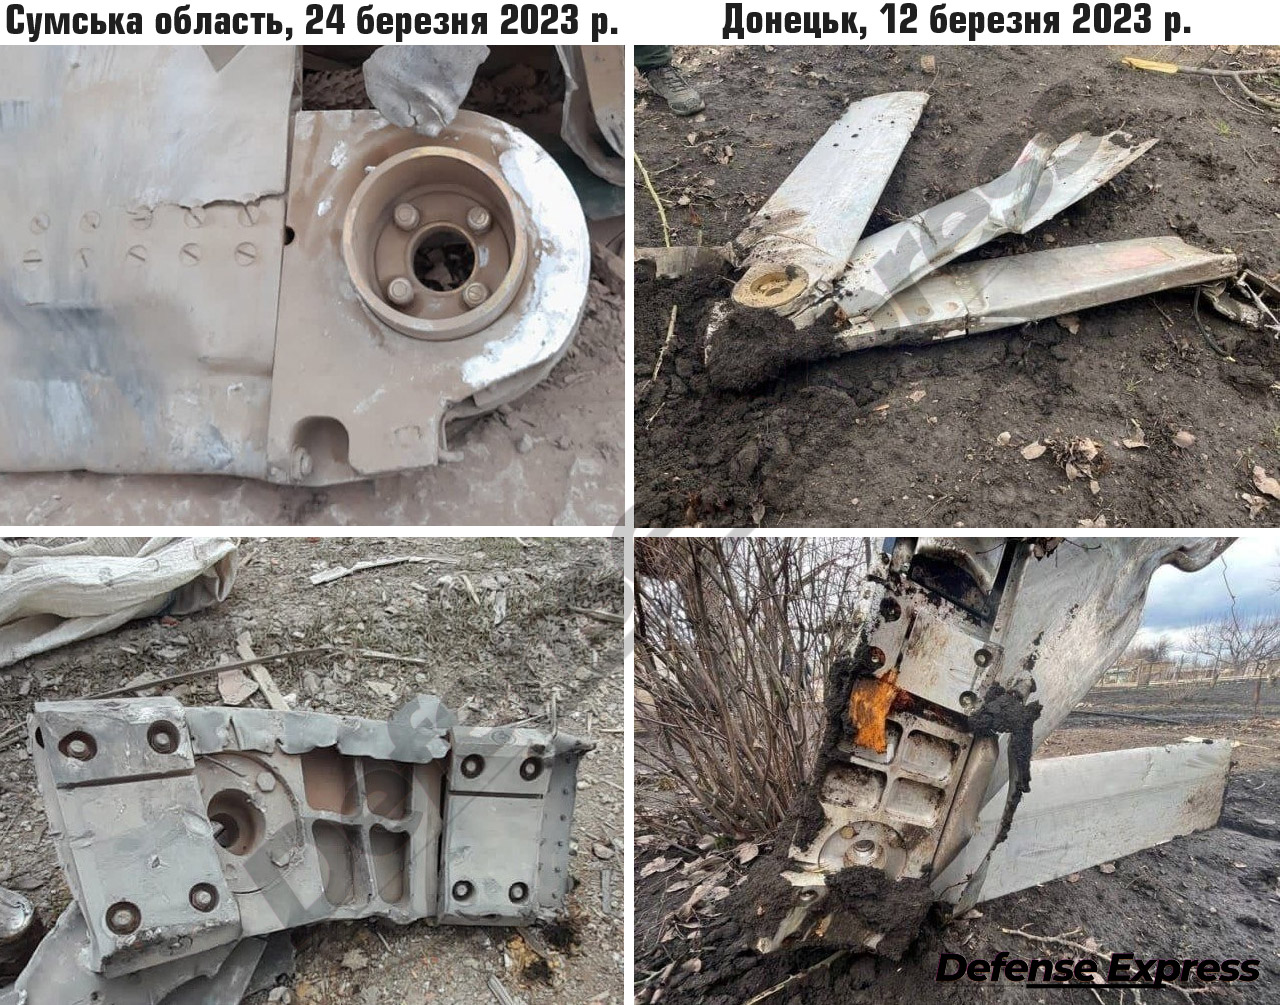 The wreckage of Russian JDAM-ER analog in Sumy Oblast on 24 March 2023 (left), and in Donetsk on 12 March 2023. Collage: Defense Express ~